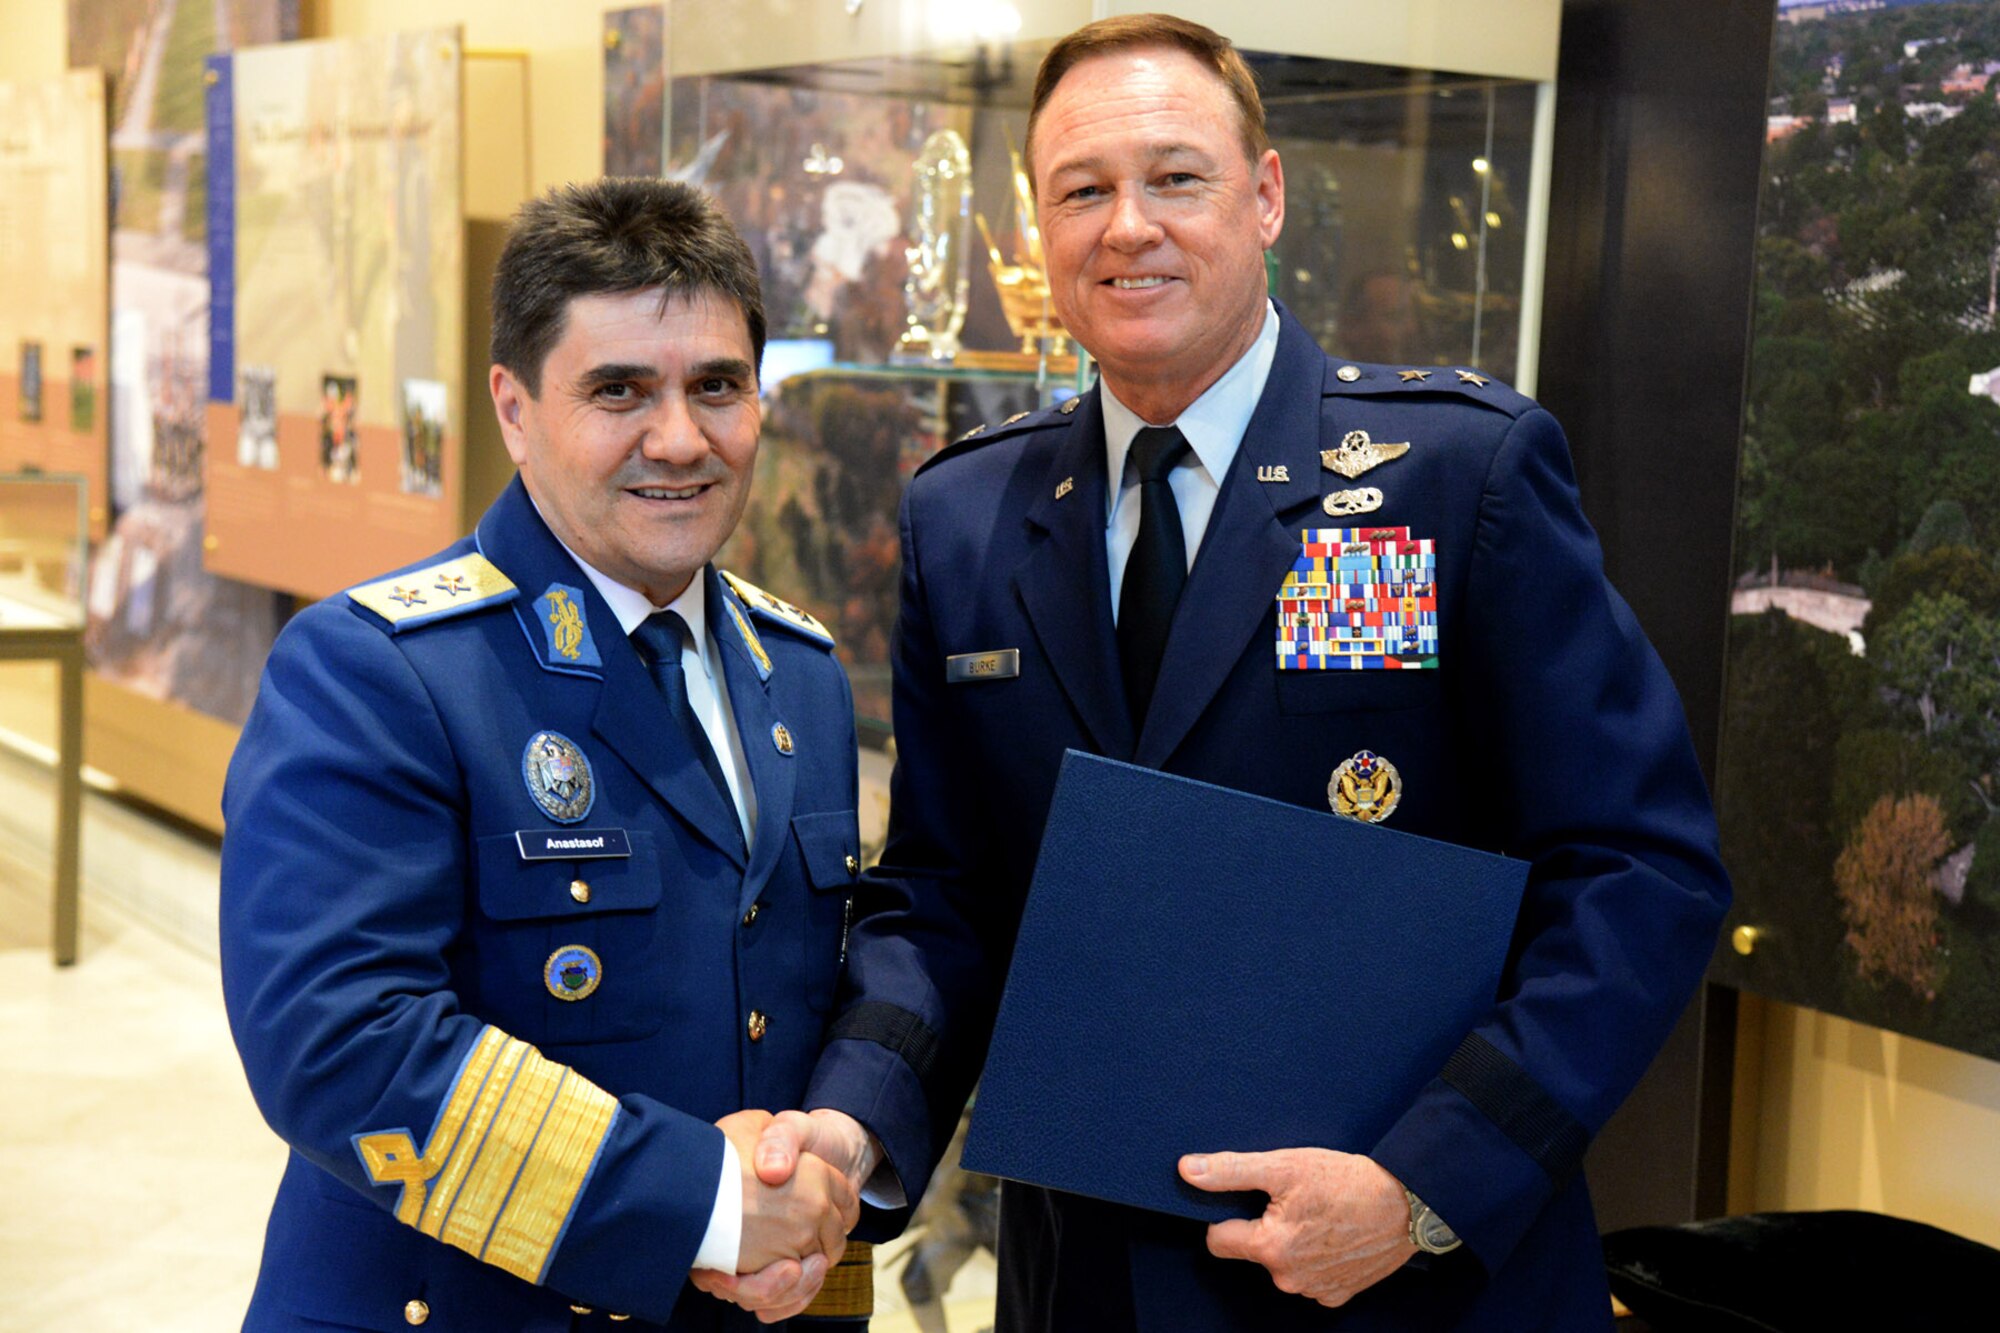 Maj. Gen. Laurian Anastasof, Chief of Air Staff of the Romanian Air Force,
is presented a memento by Air Force District of Washington Commander Maj.
Gen. Darryl Burke while visiting the Tomb of the Unknown Soldier for a
wreath laying ceremony at Arlington National Cemetery on May 24, 2016.
Distinguished visitors commonly pay formal respects to the sacrifice of
America's veterans in foreign wars by placing a wreath before the Tomb. The
Air Force District of Washington brings air, space and cyberspace
capabilities to the joint team protecting the nation's capital, and supports
local personnel and those serving worldwide. (U.S. Air Force Photo/Tech. Sgt. Matt Davis)

